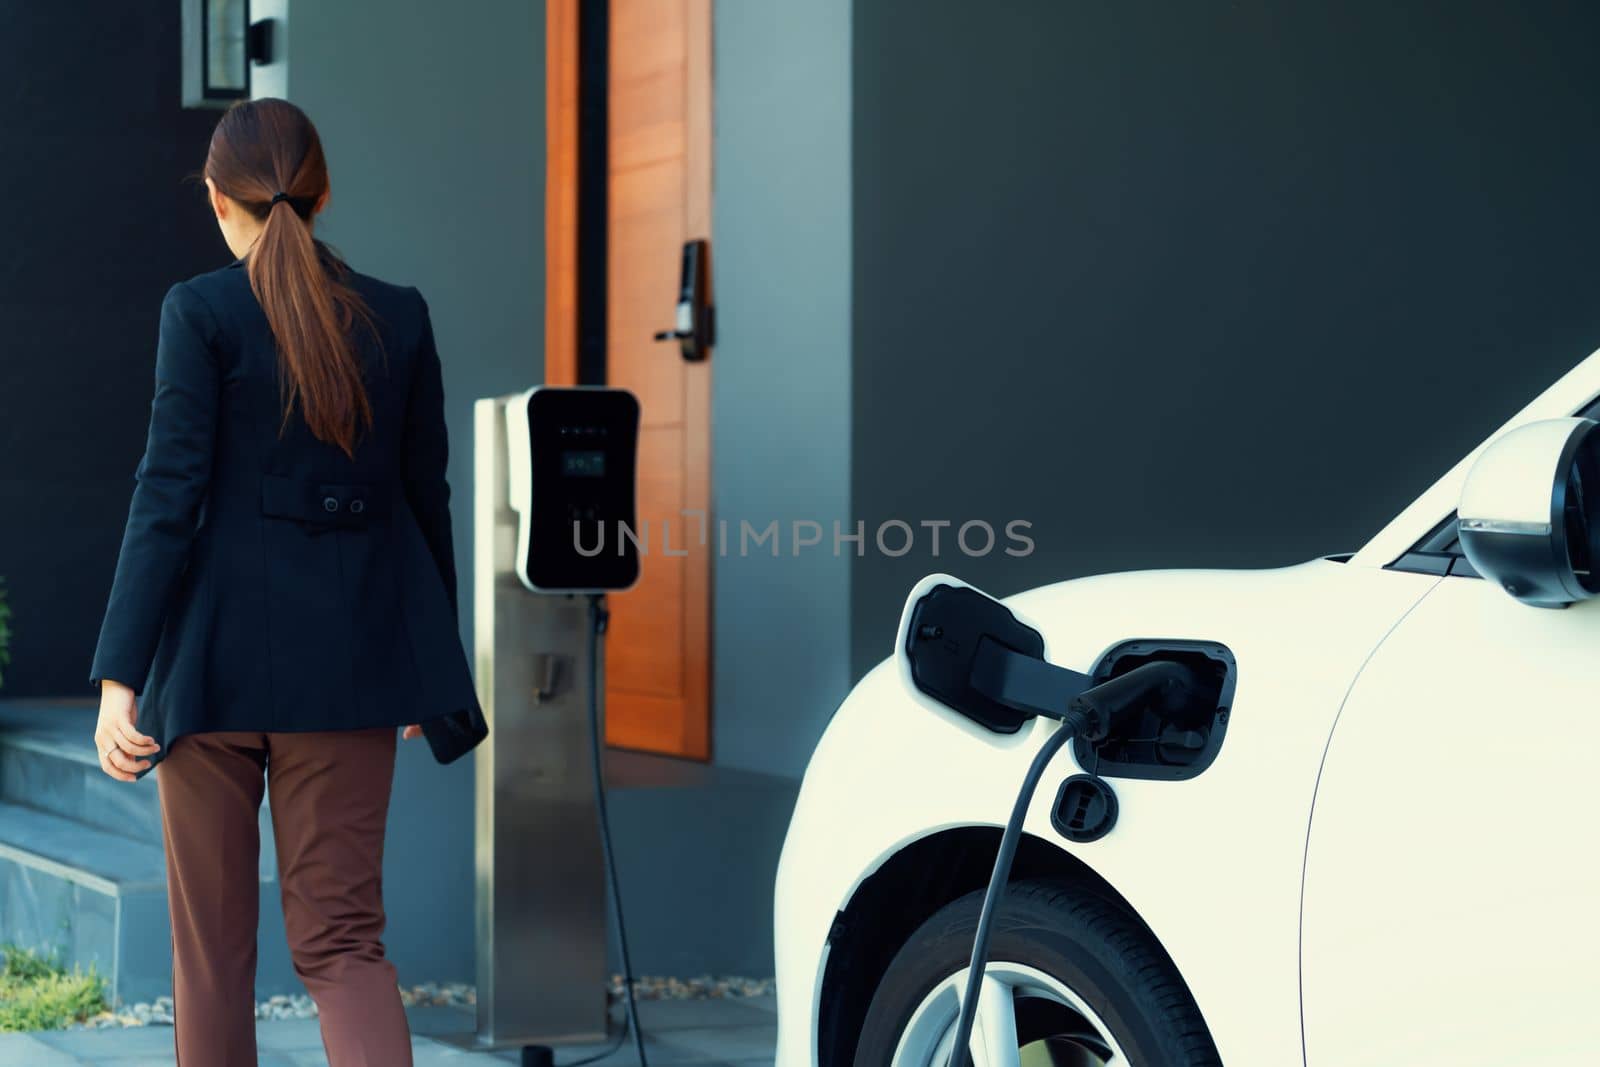 Progressive woman install cable plug to her electric car with home charging station. Concept of the use of electric vehicles in a progressive lifestyle contributes to clean environment.